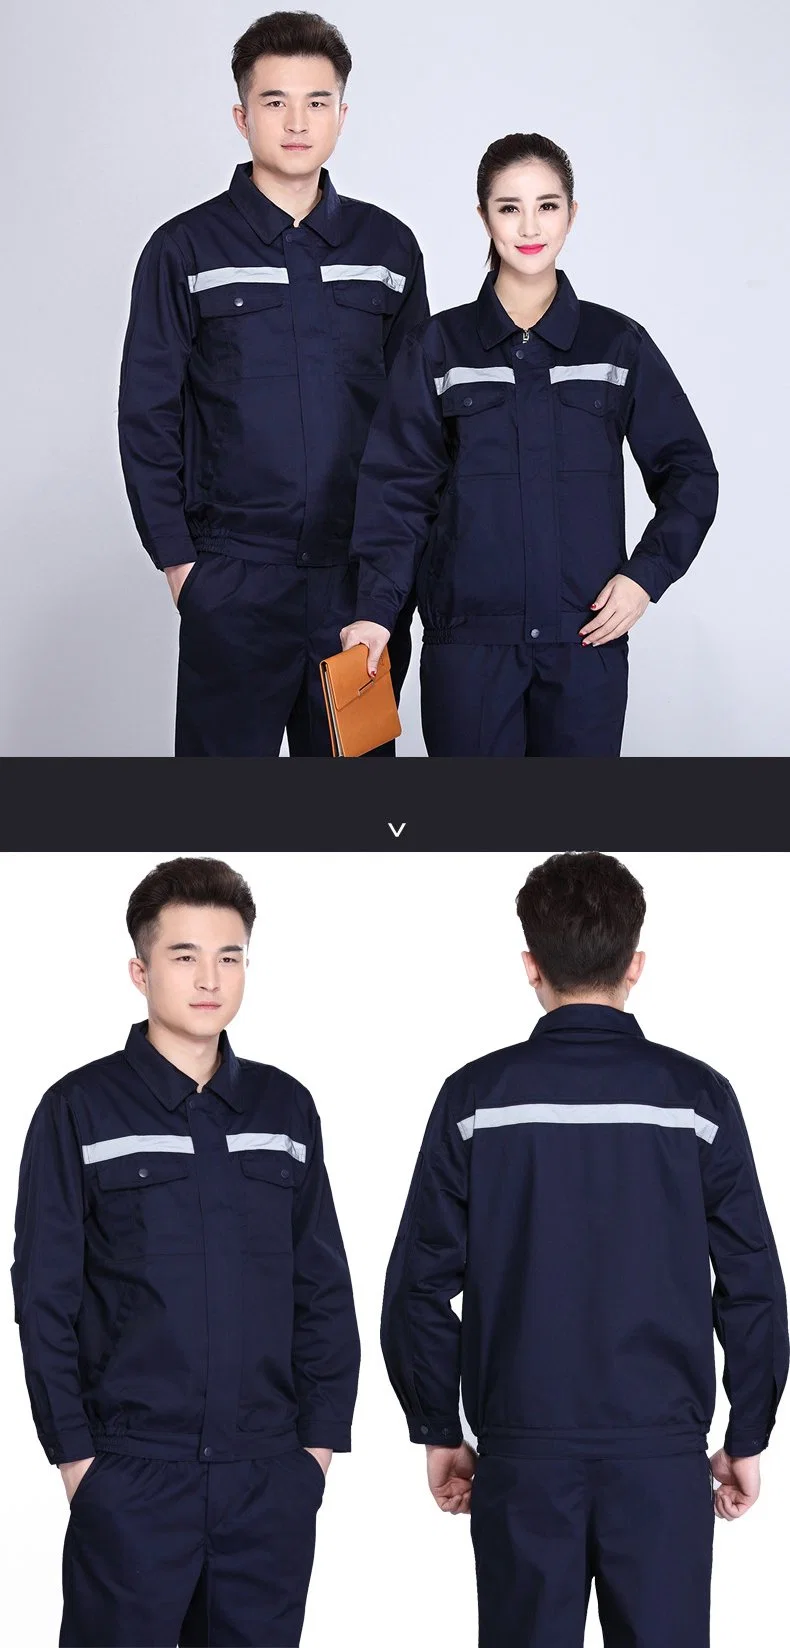 Classic Fit Free Draping High-Quality Fabric Work Uniform/Source Manufacturer Customizable Work Clothes